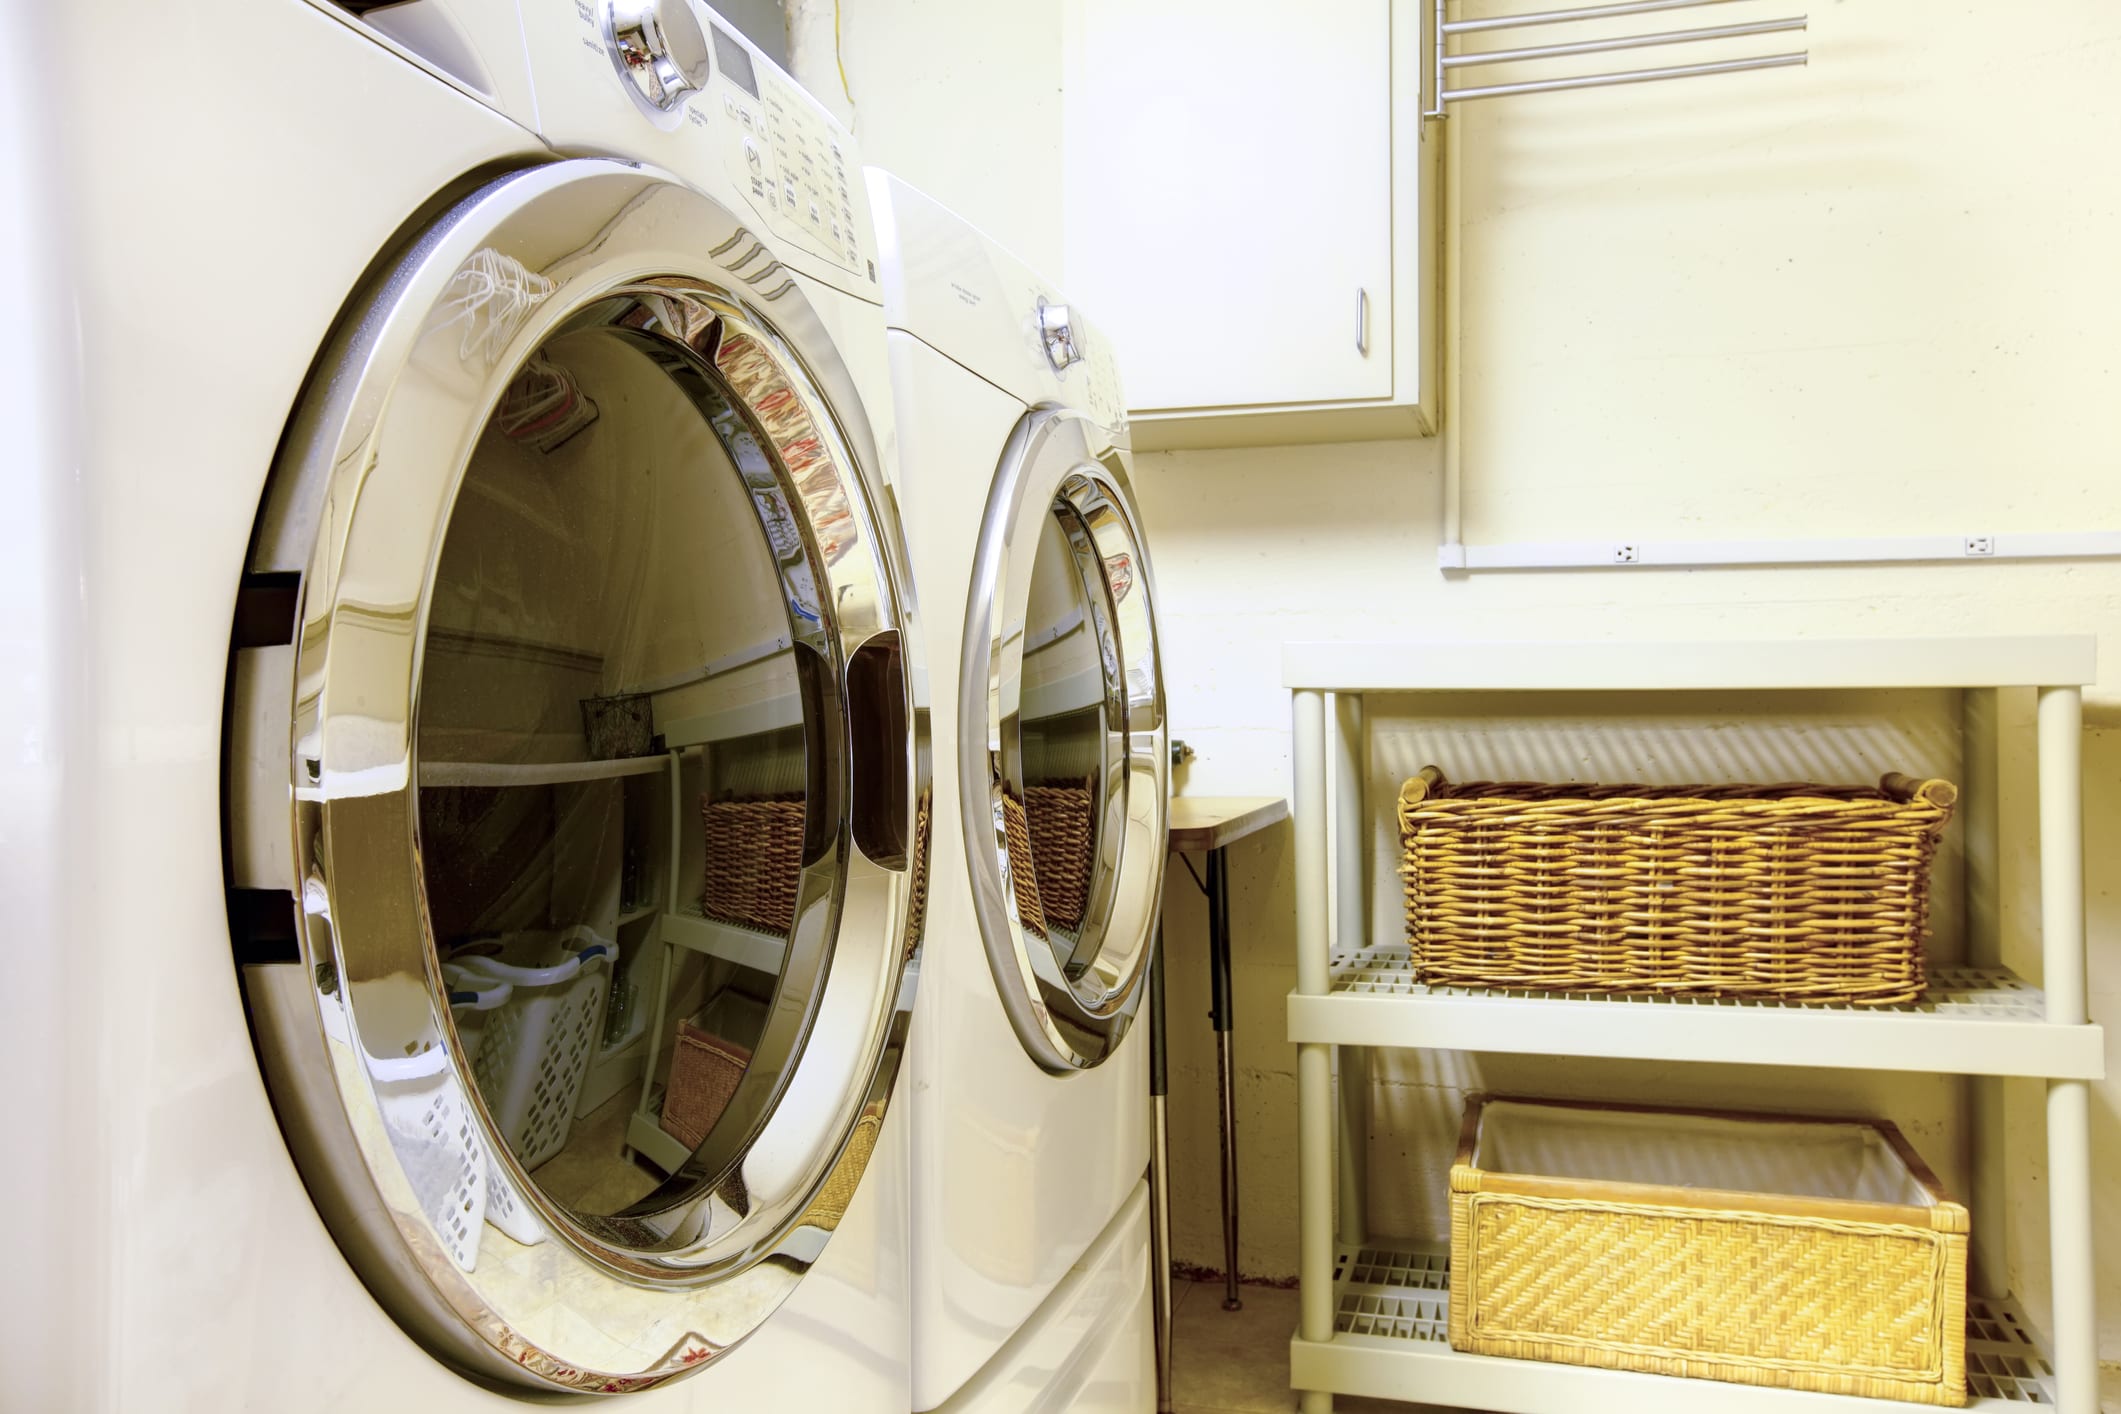 Laundry room with modern appliaces